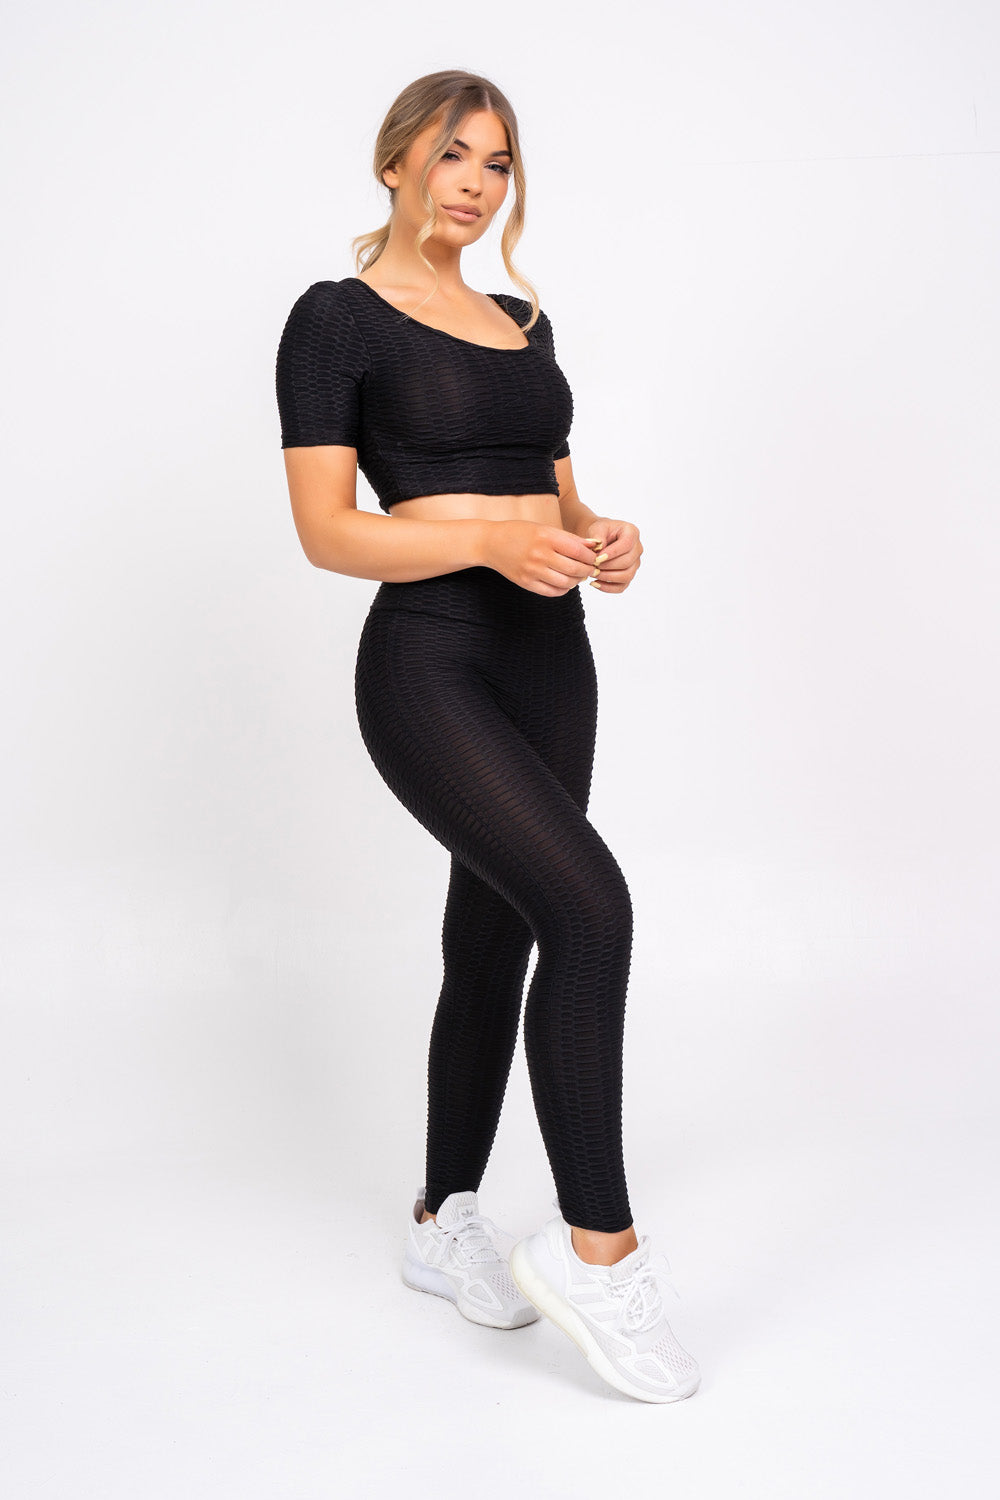 Dion Black Honeycomb Sports Cropped Top & leggings Co-ord Fitness Set